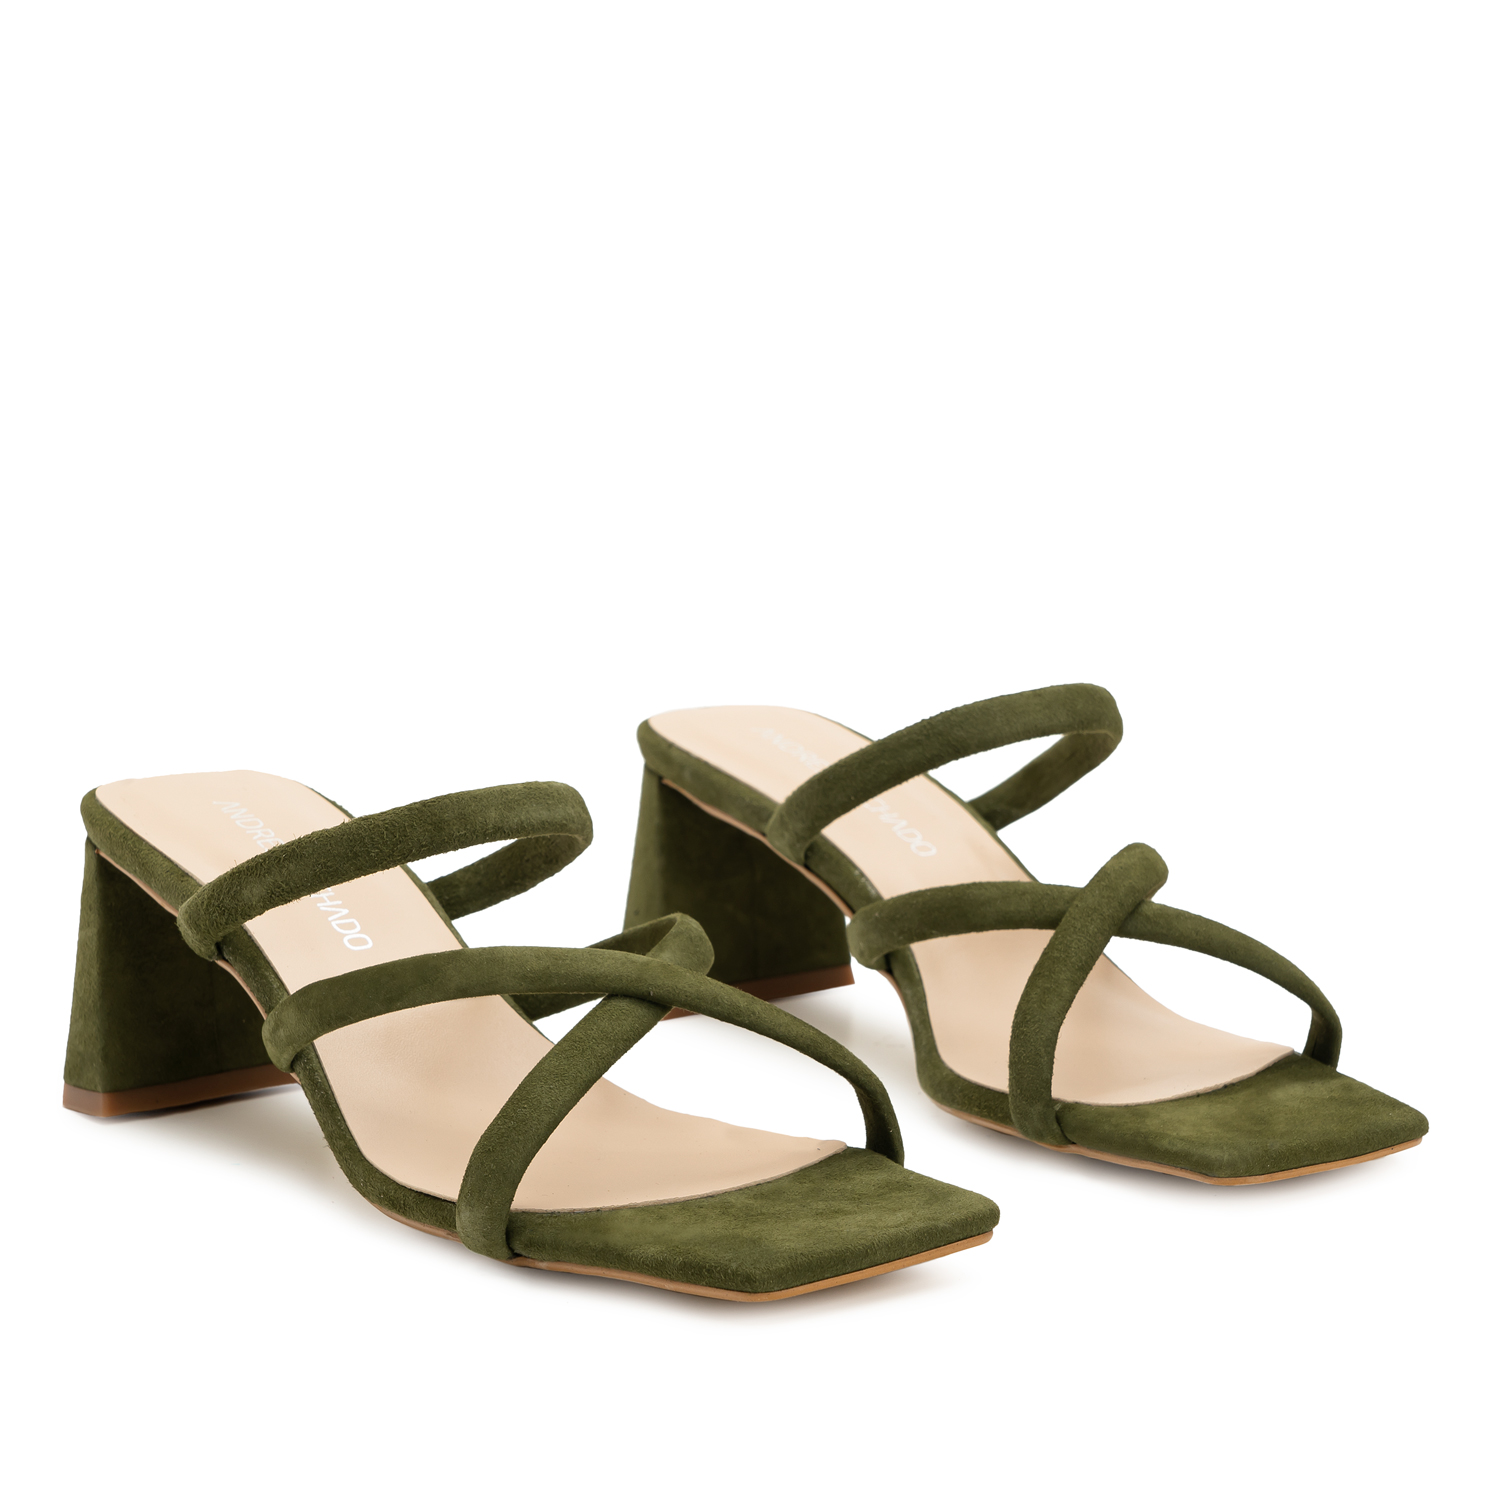 Heeled Mules in Kaki Split Leather with Square Toe 